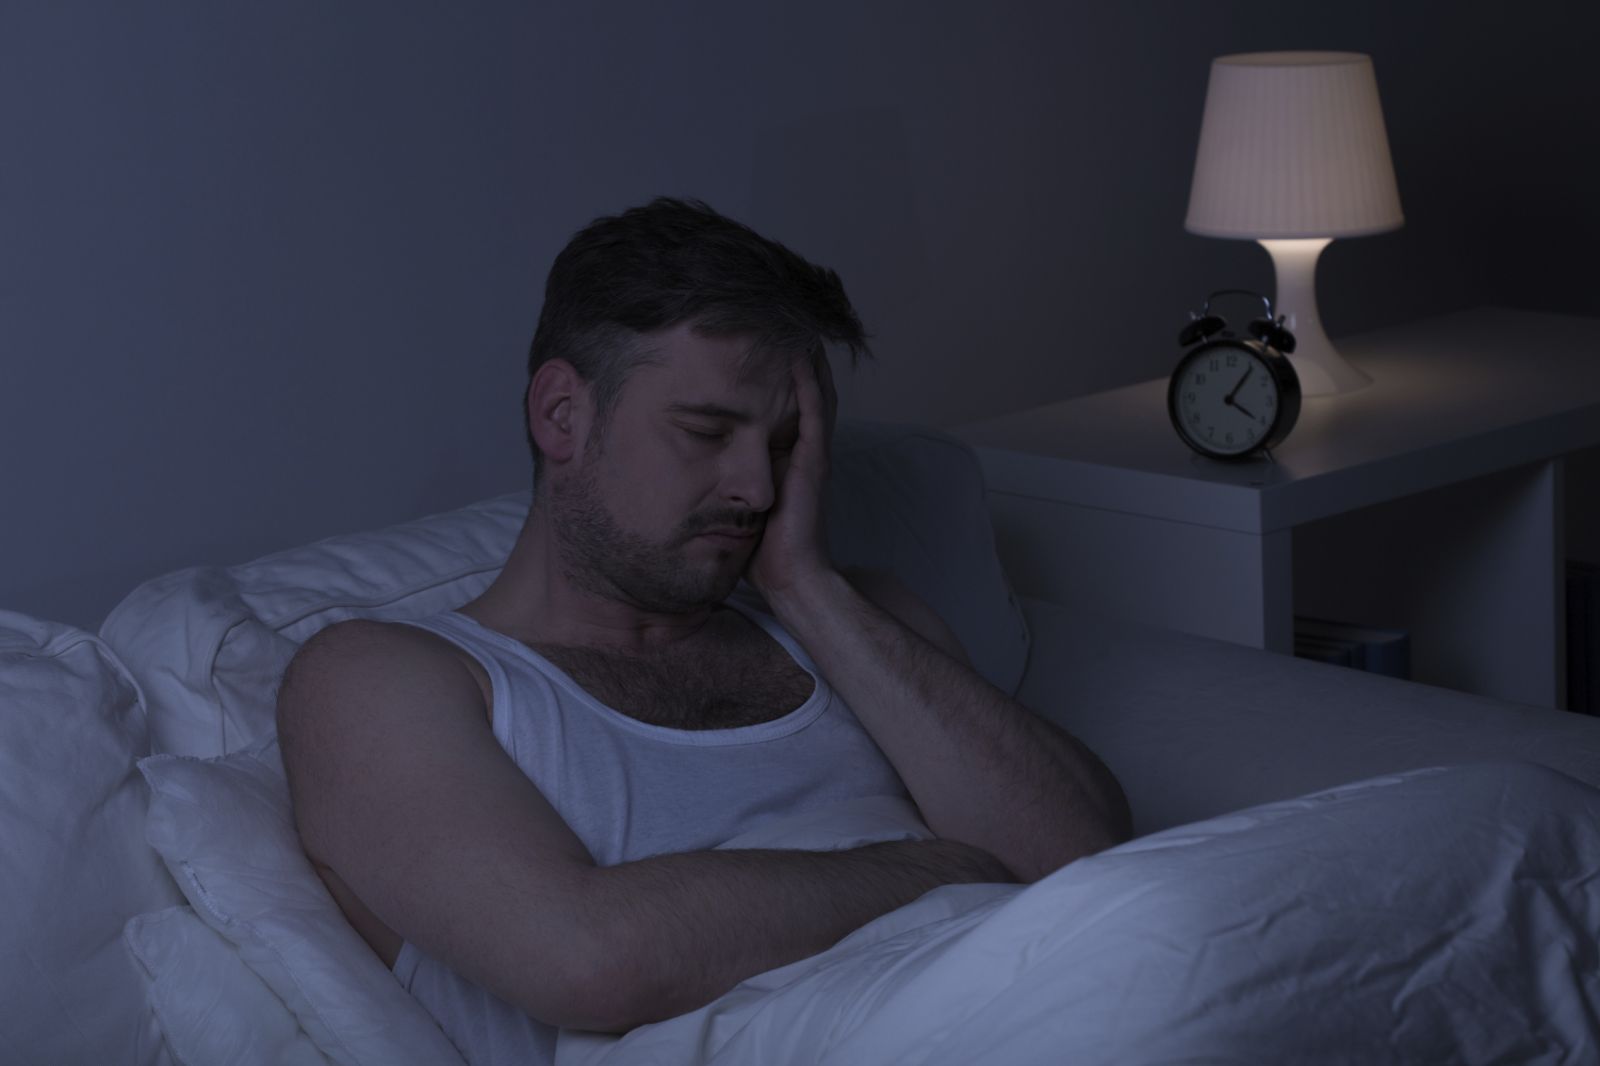 Sleeping with cruralgia: relieving pain at night